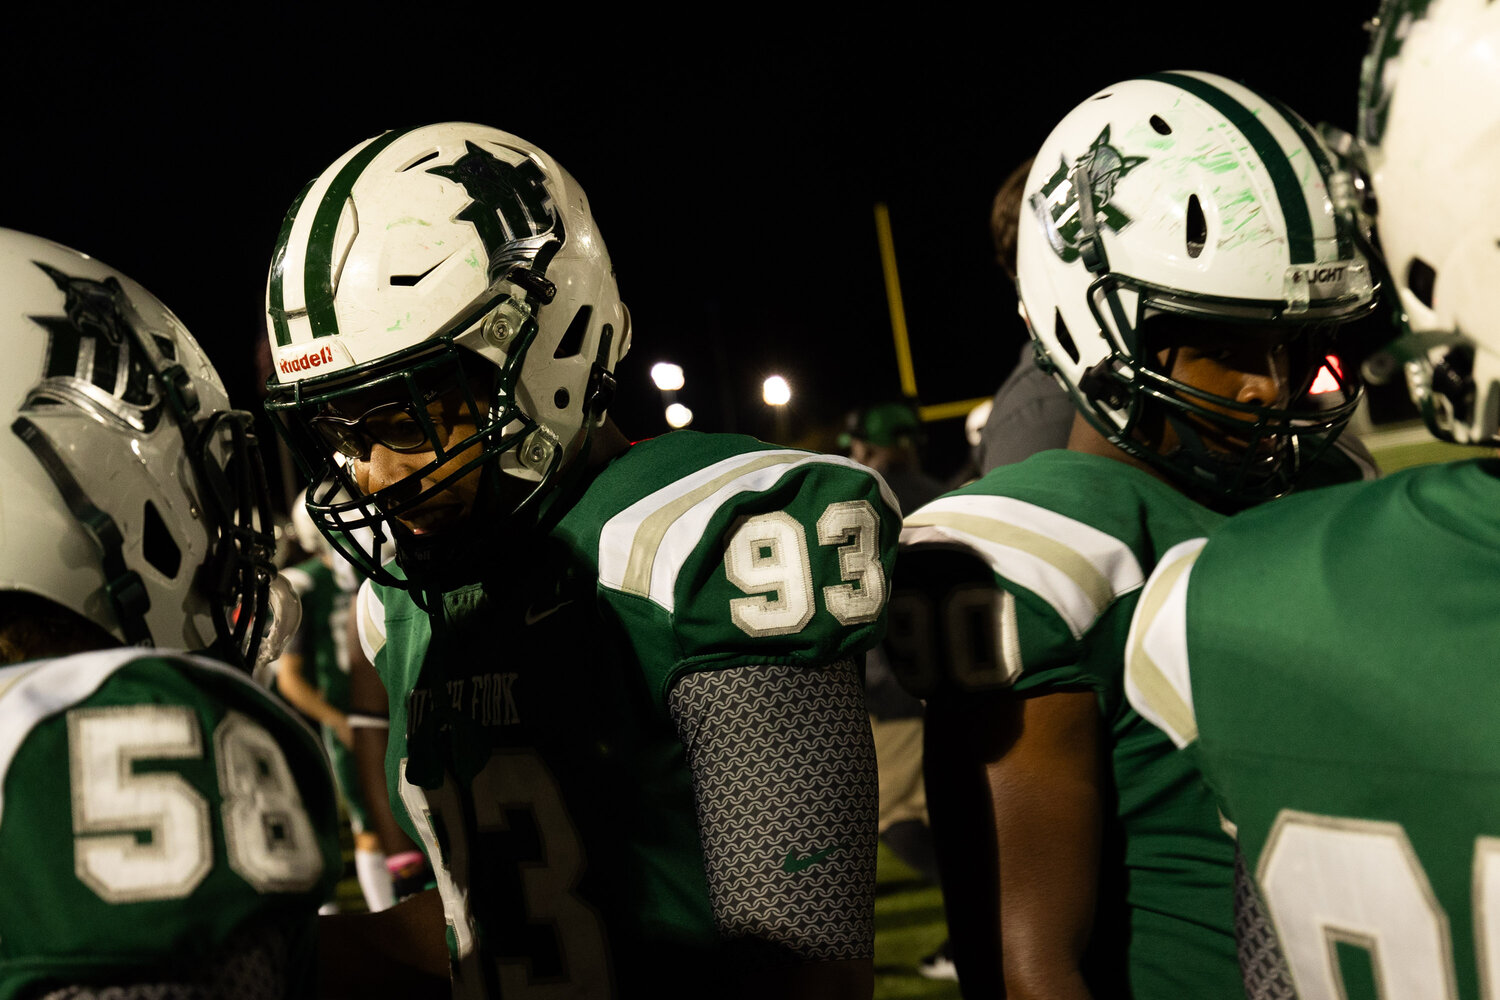 Dutch Fork Silver Foxes made a statement in the first round of the SCHSL playoffs with a 55-7 win Nov. 3 over Boiling Springs.